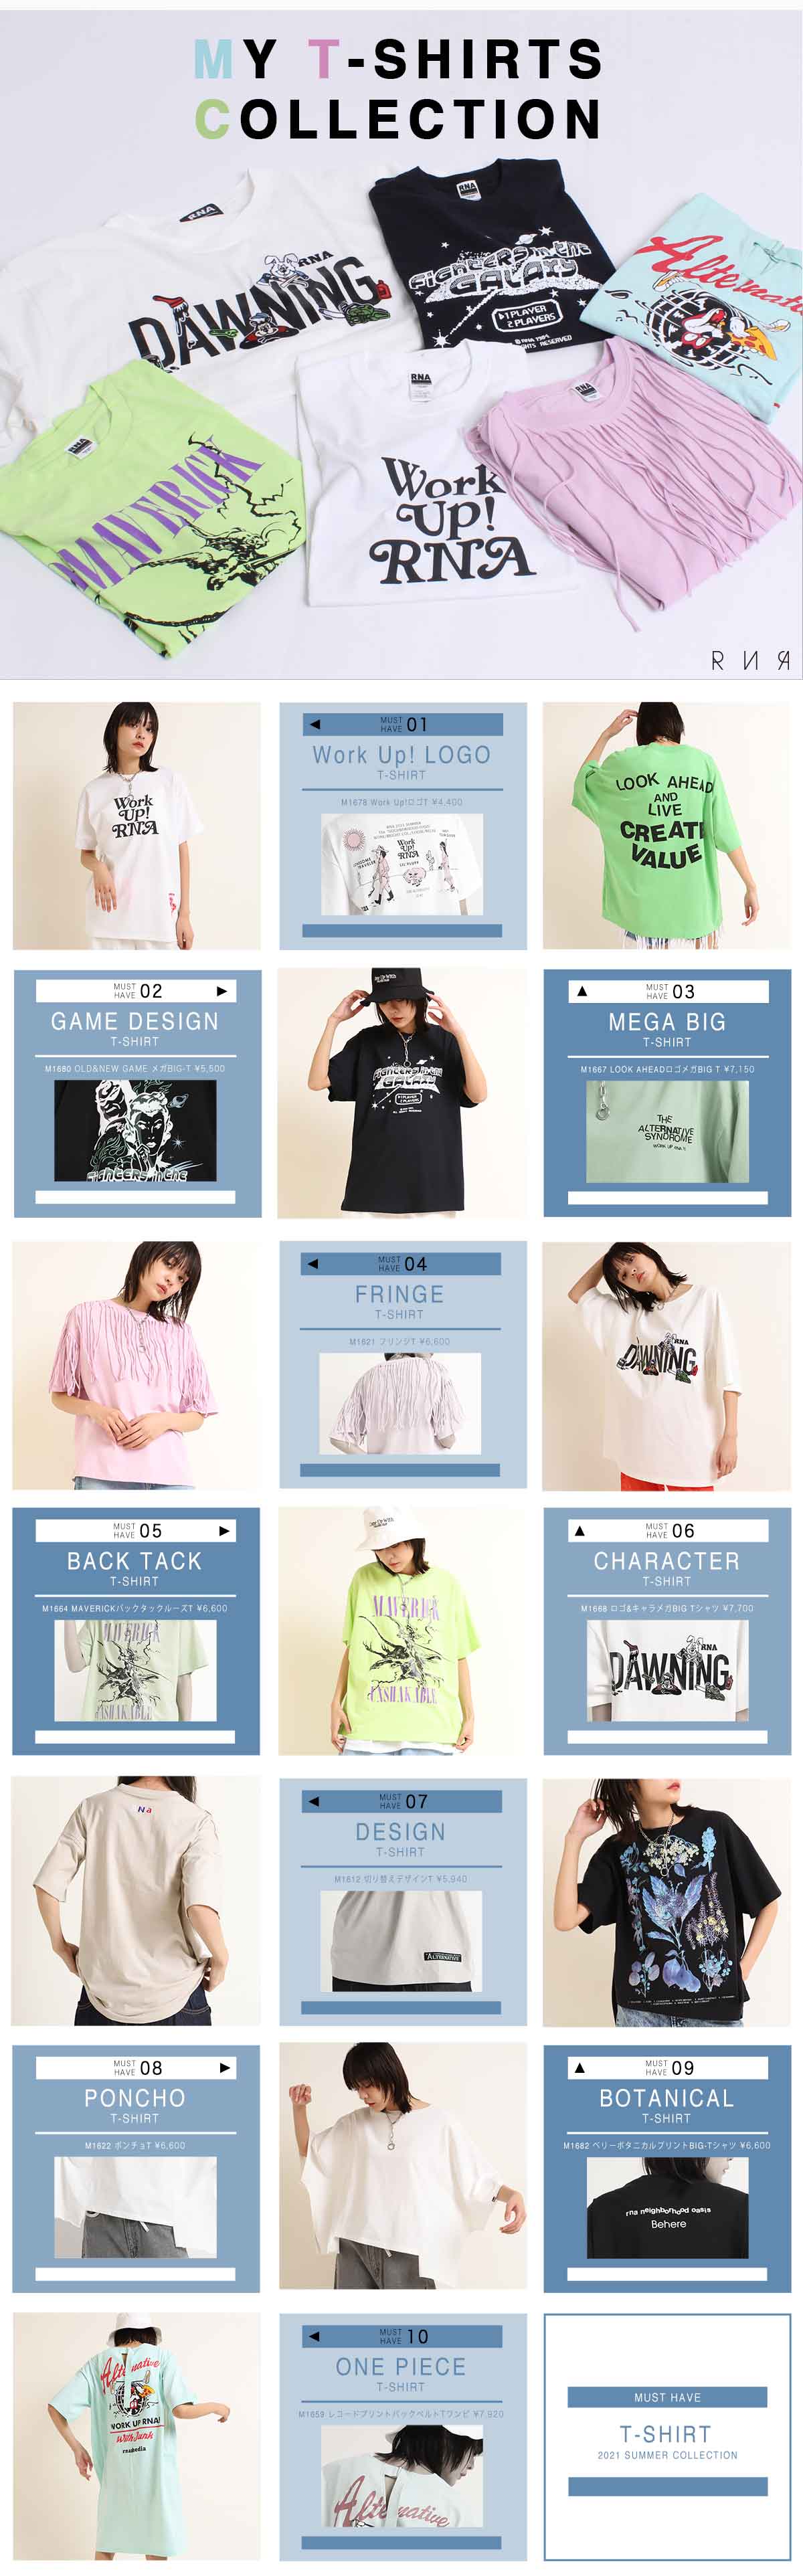 RNA T-SHIRTS COLLECTION